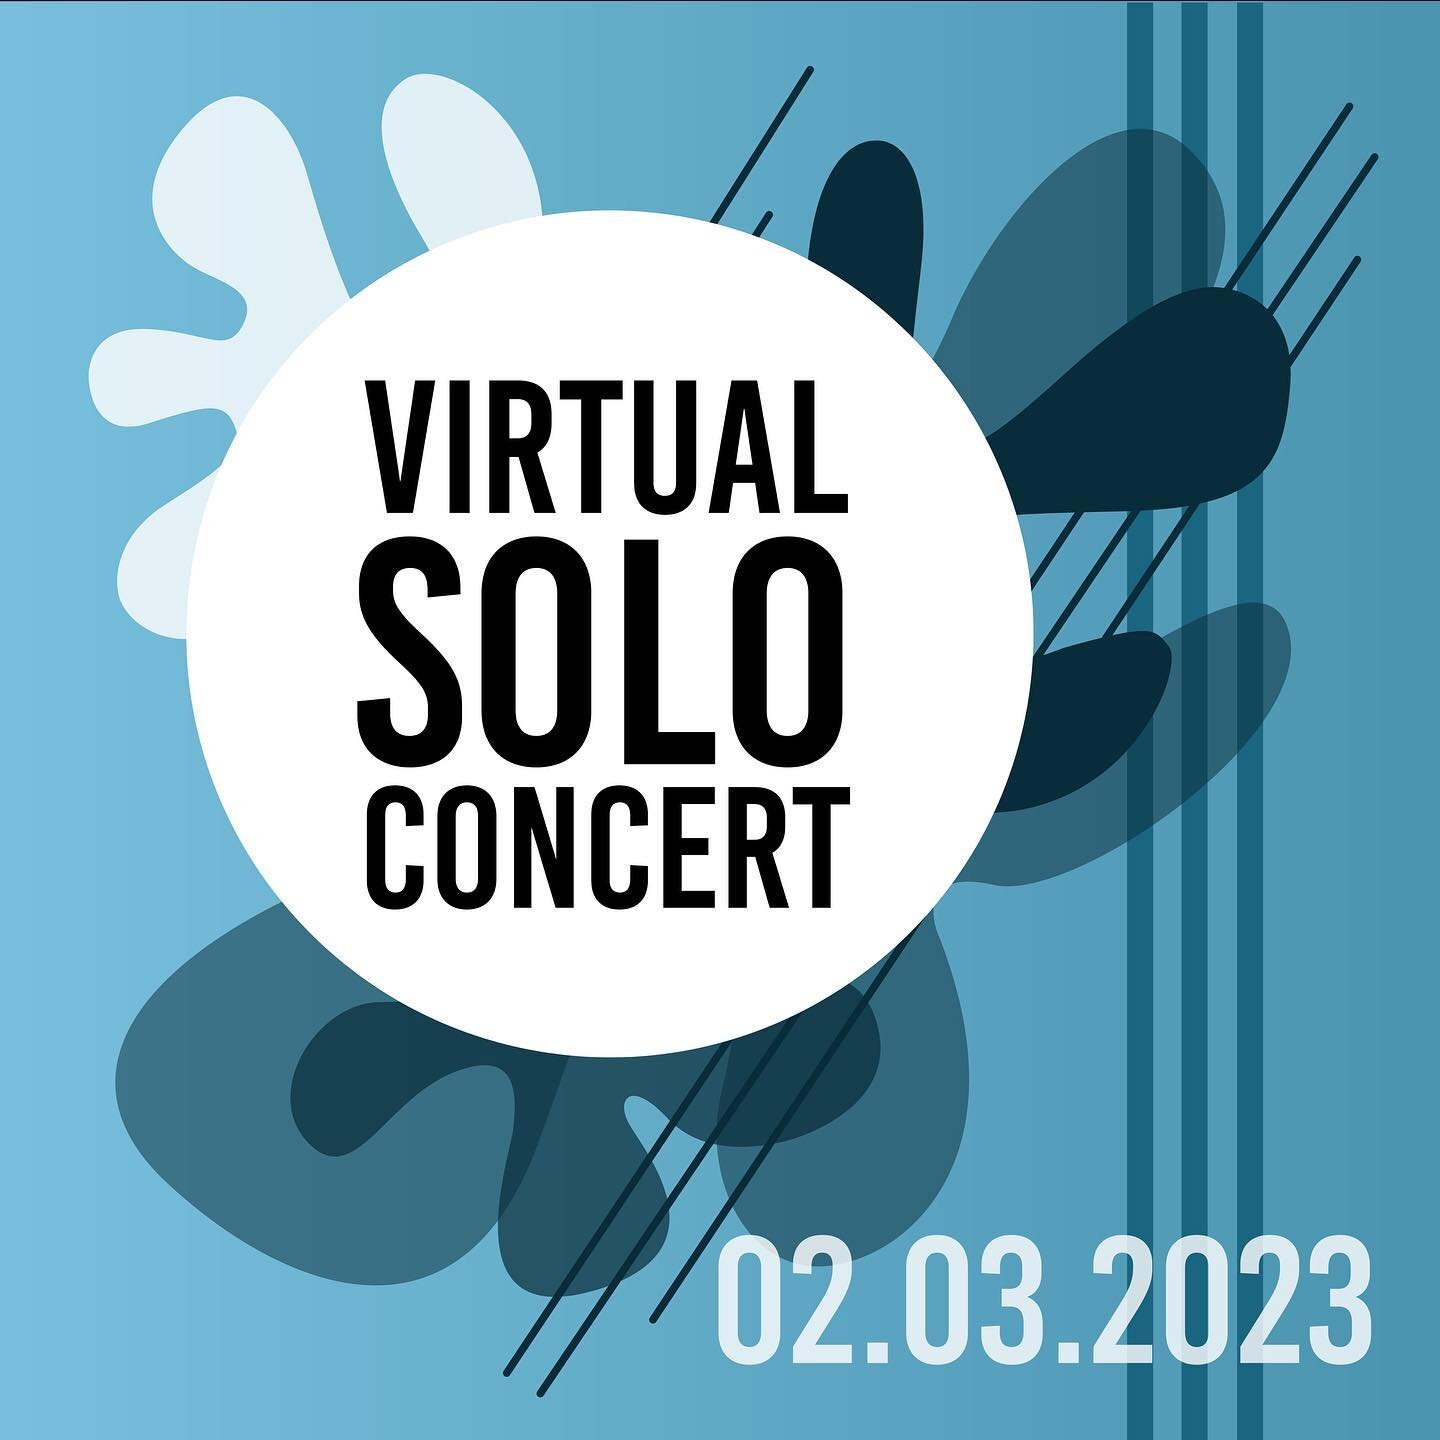 The West Covina High School Choral Department proudly presents

2023 Virtual Solo Concert
February 3, 2023; 7pm (PST)
YouTube.com/WCHSChoralDepartment

Join us for this incredible concert featuring solo performances from several singers from The West